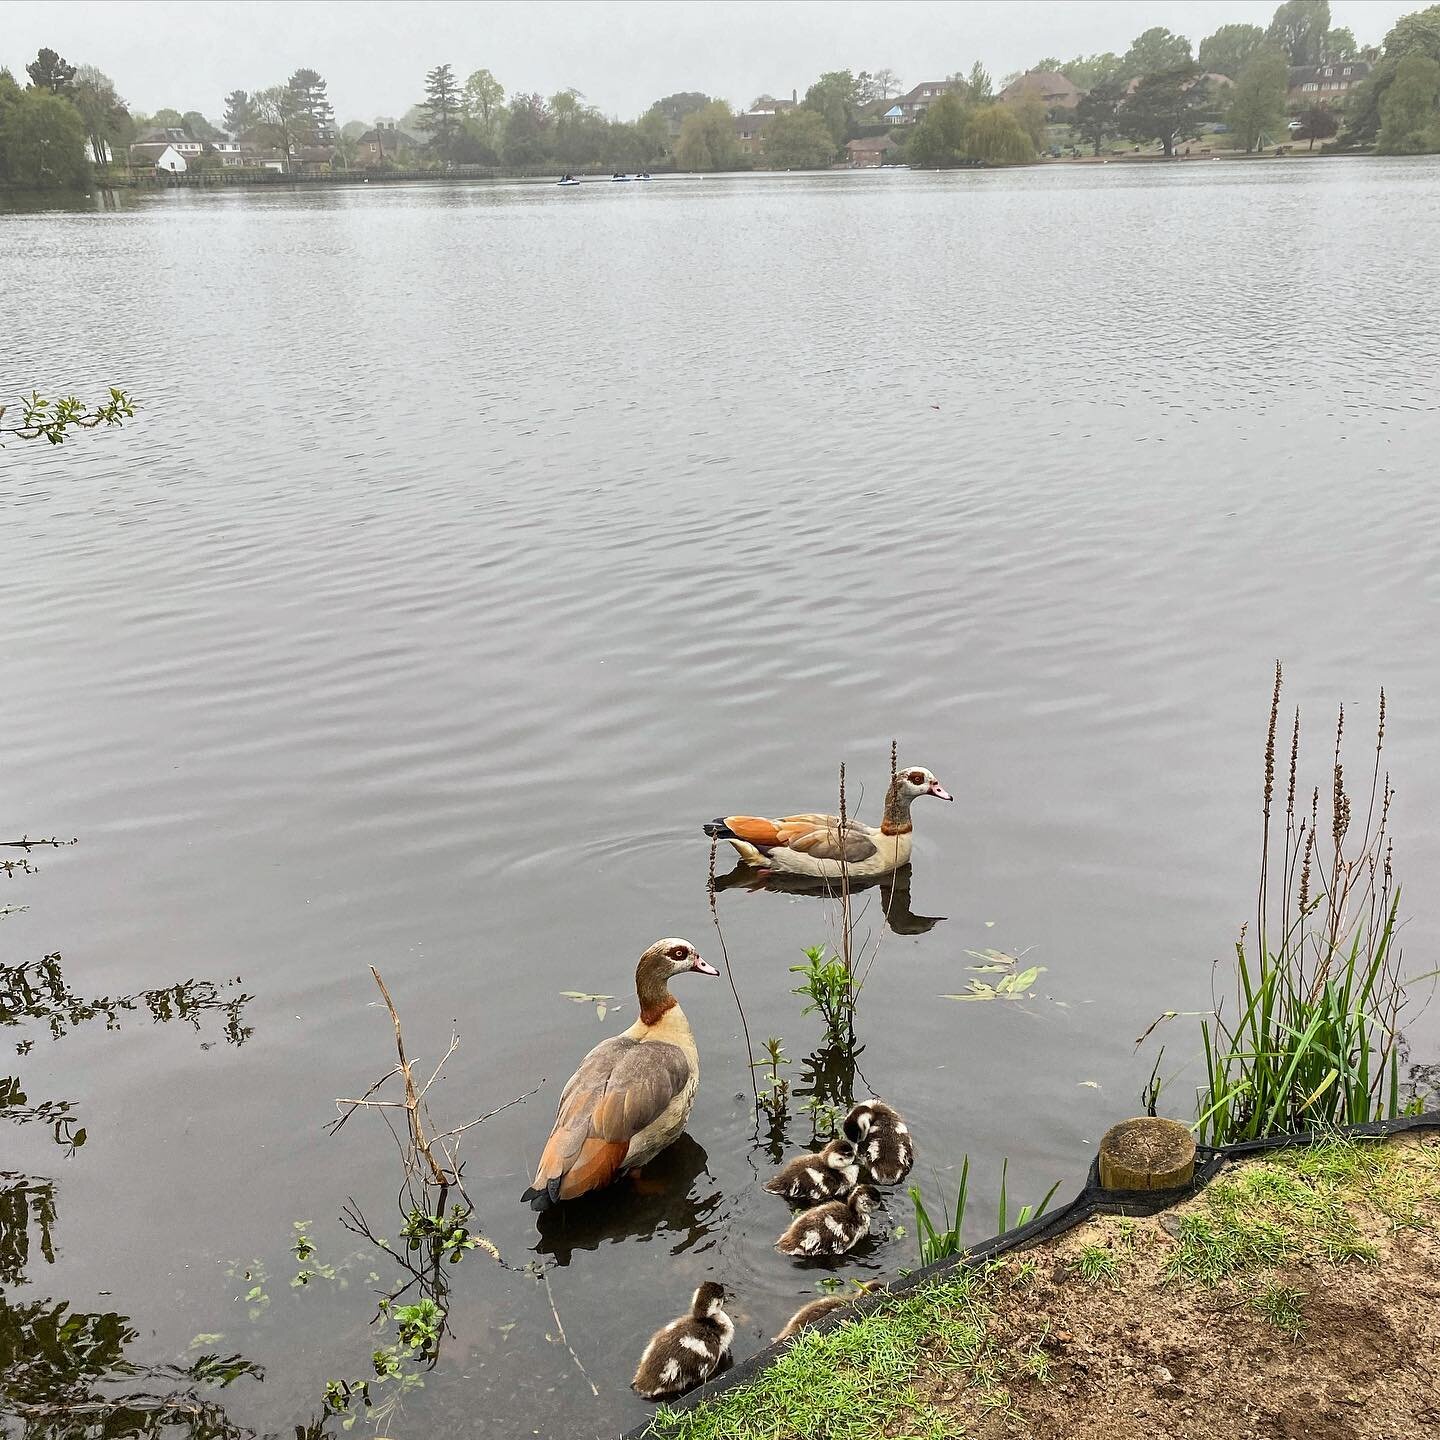 More spring babies! The first Egyptian goslings have arrived on the Heath Lake in Petersfield! 🐥

#spring #goslings #egyptiangeese #egyptiangoose #geese #heathlake #petersfield #hampshire